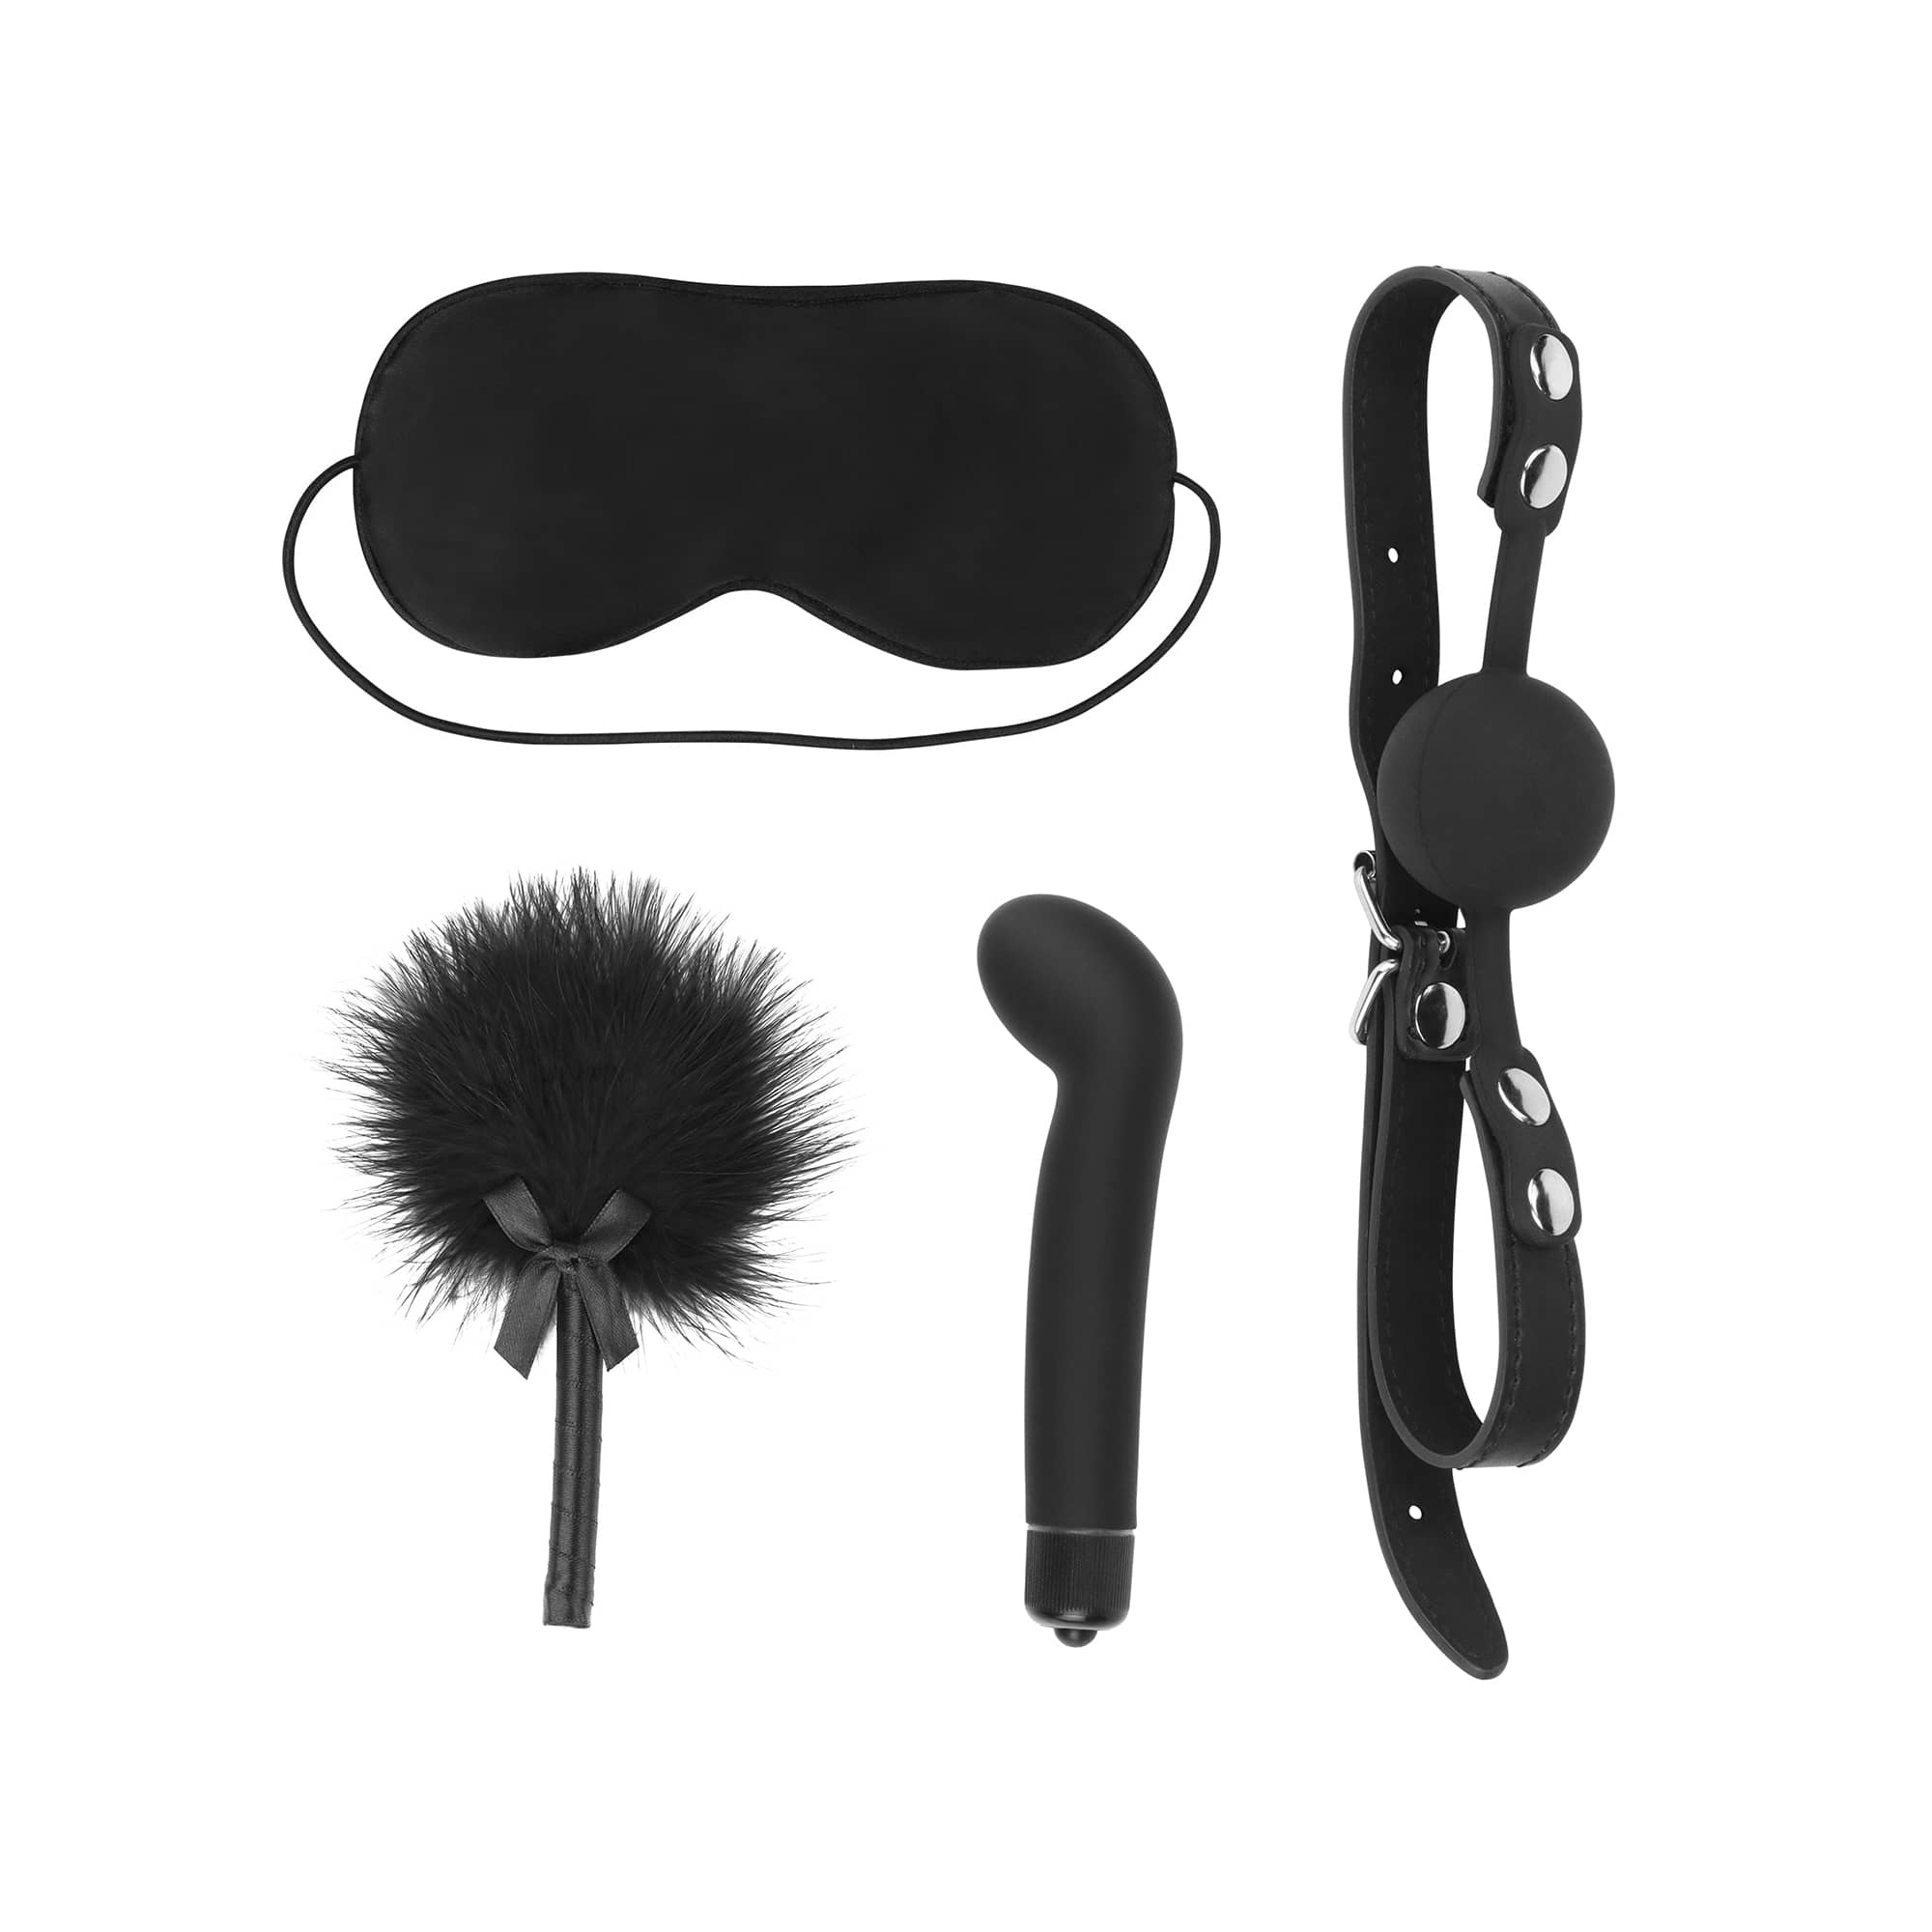 The g spot vibrator and blindfold and ball gag and feather tickler of the bdsm bondage sets